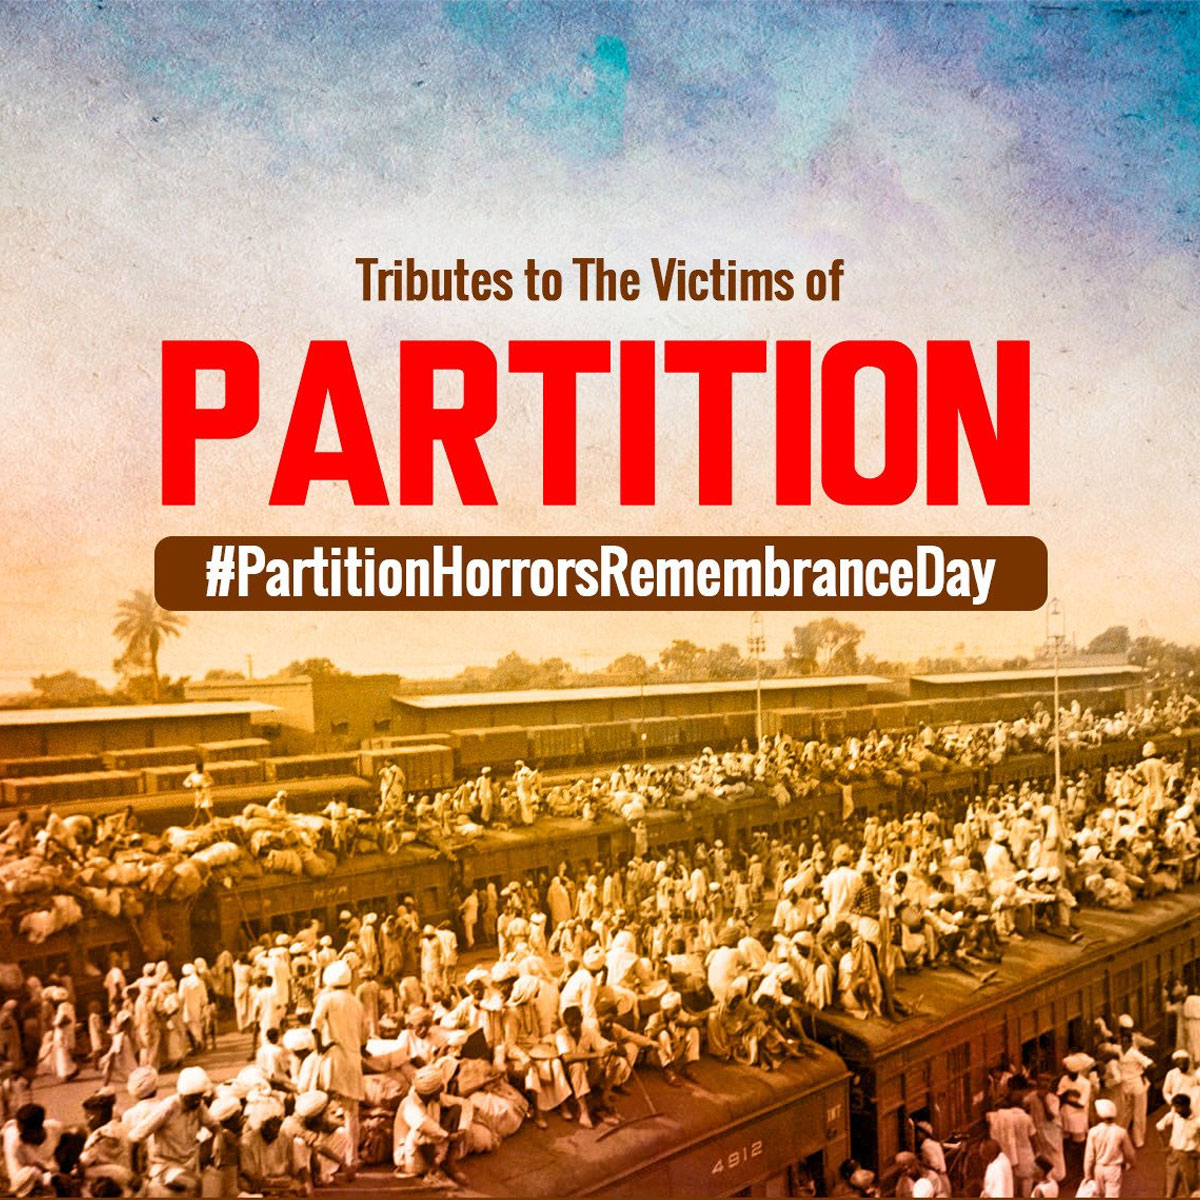 pm-great-gesture-august-14-partition-horrors-remembrances-day